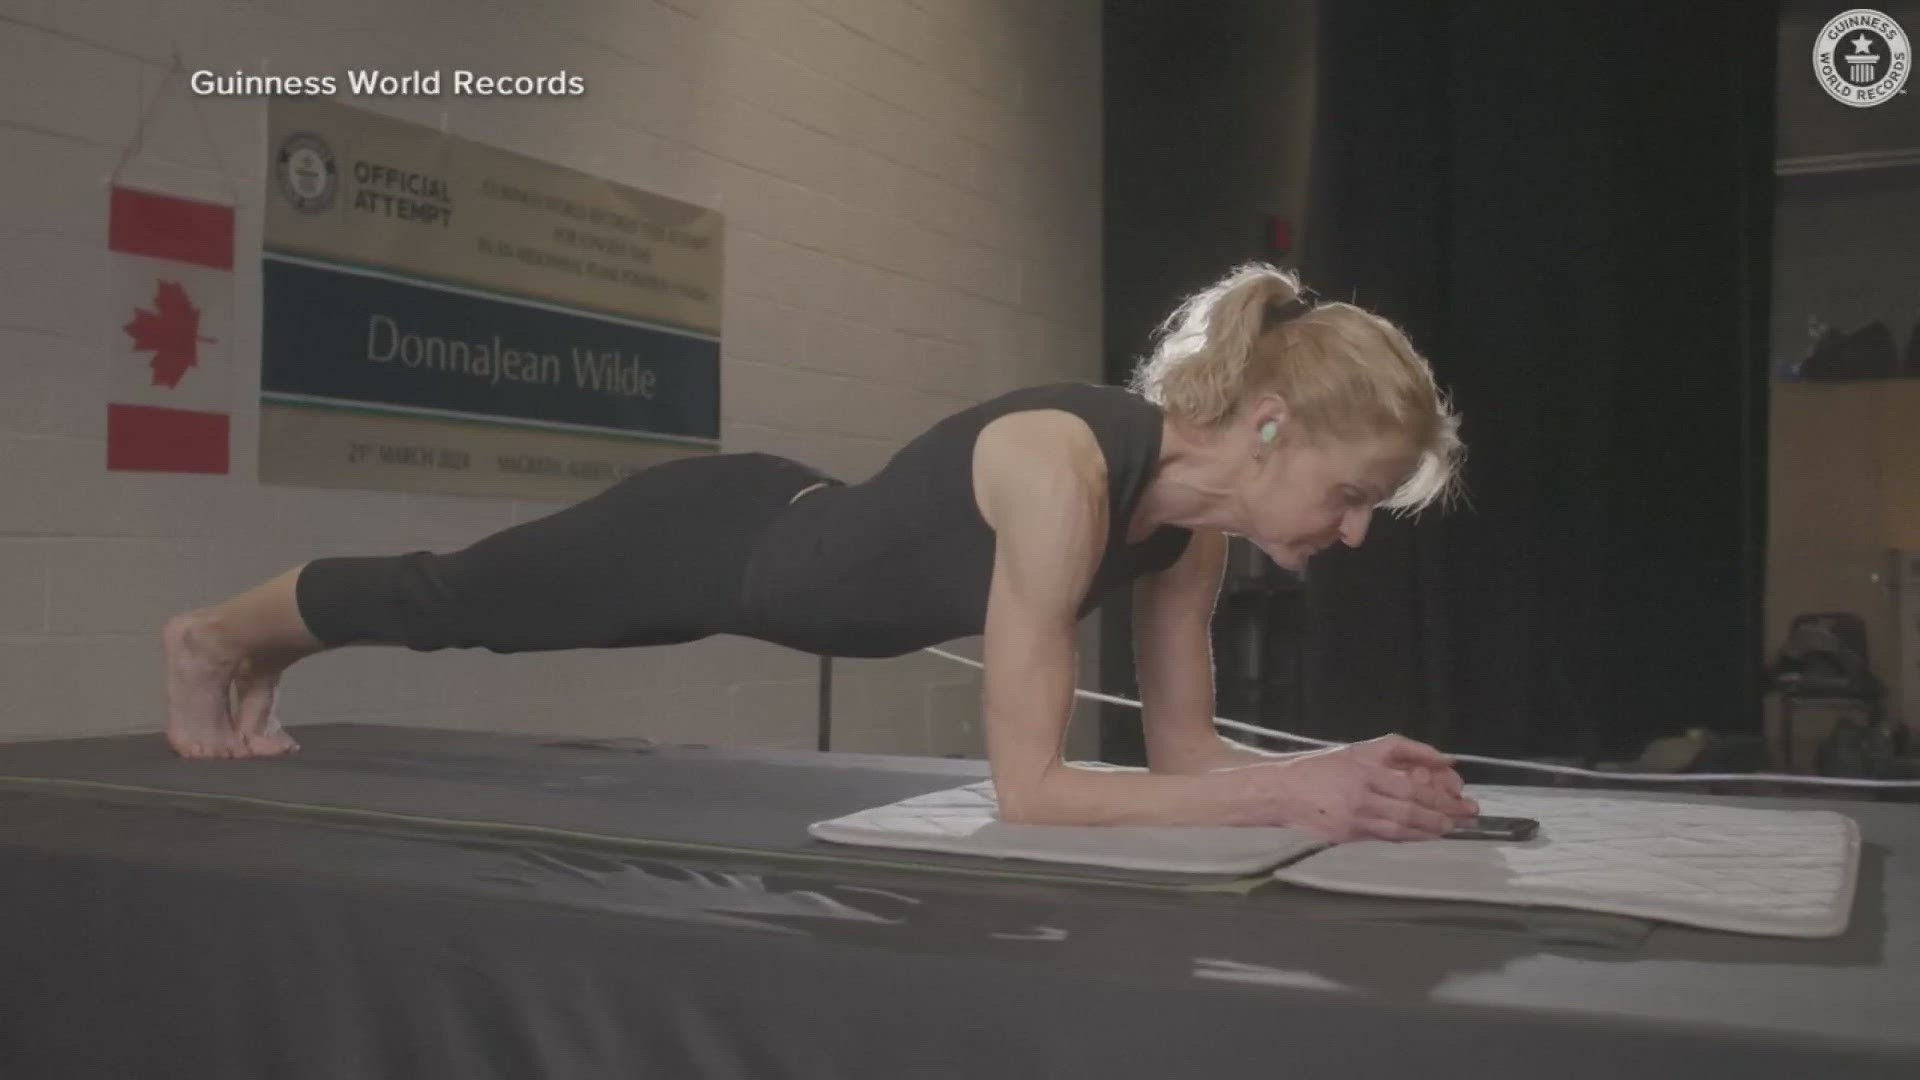 DonnaJean Wilde planked for four hours, 30 minutes and 11 seconds, breaking the world record.